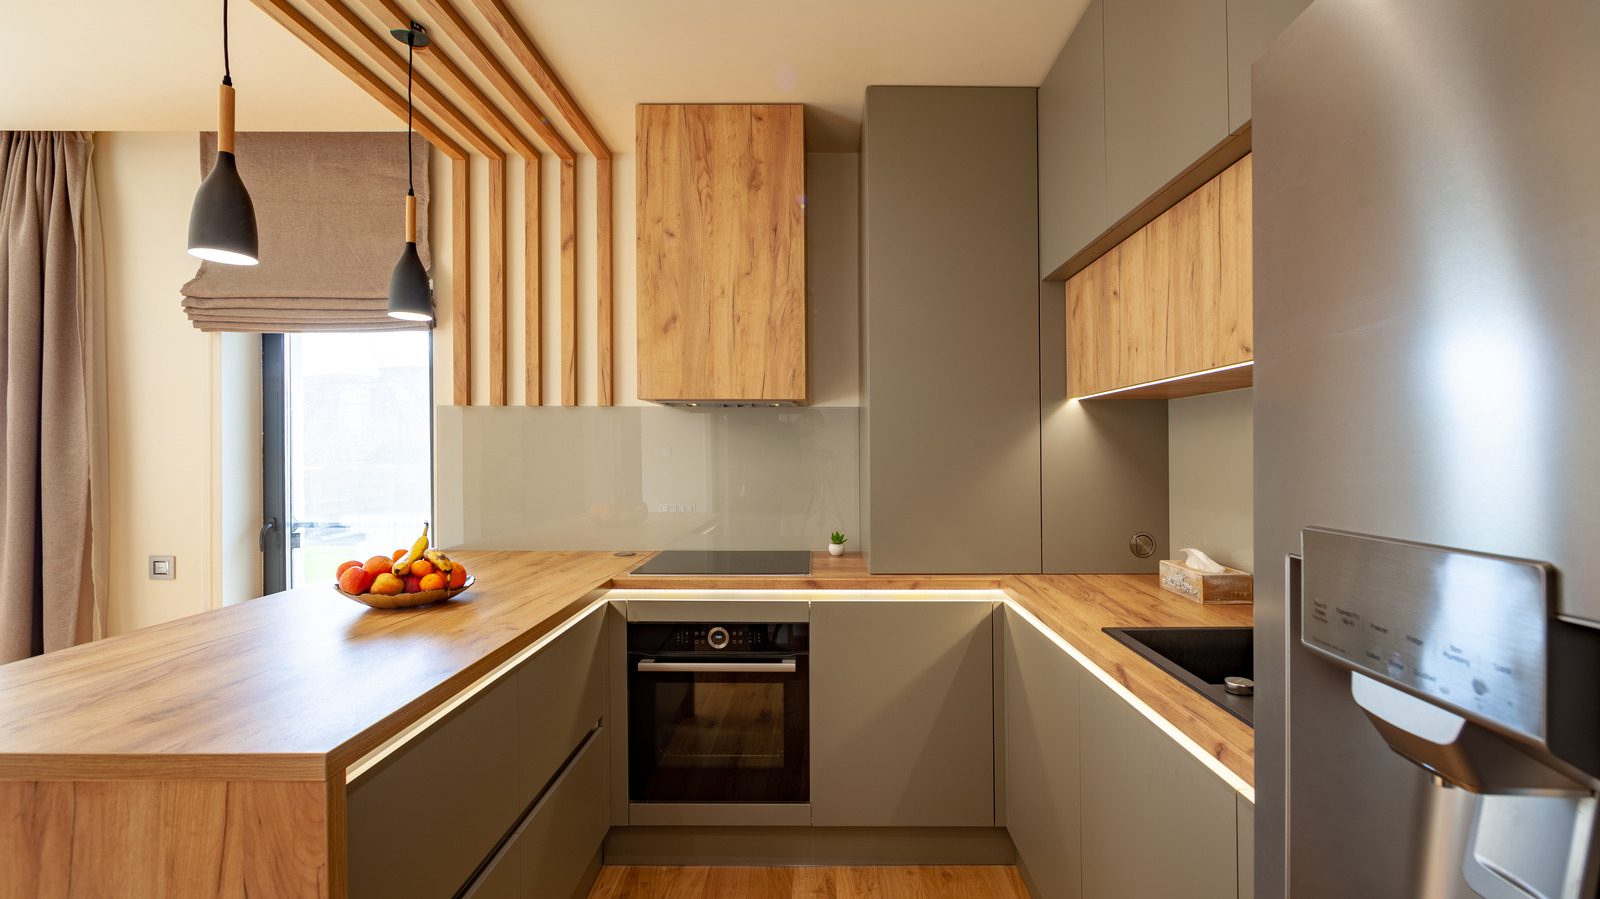 What Kitchen Aesthetic Matches Your Style? - M2woman